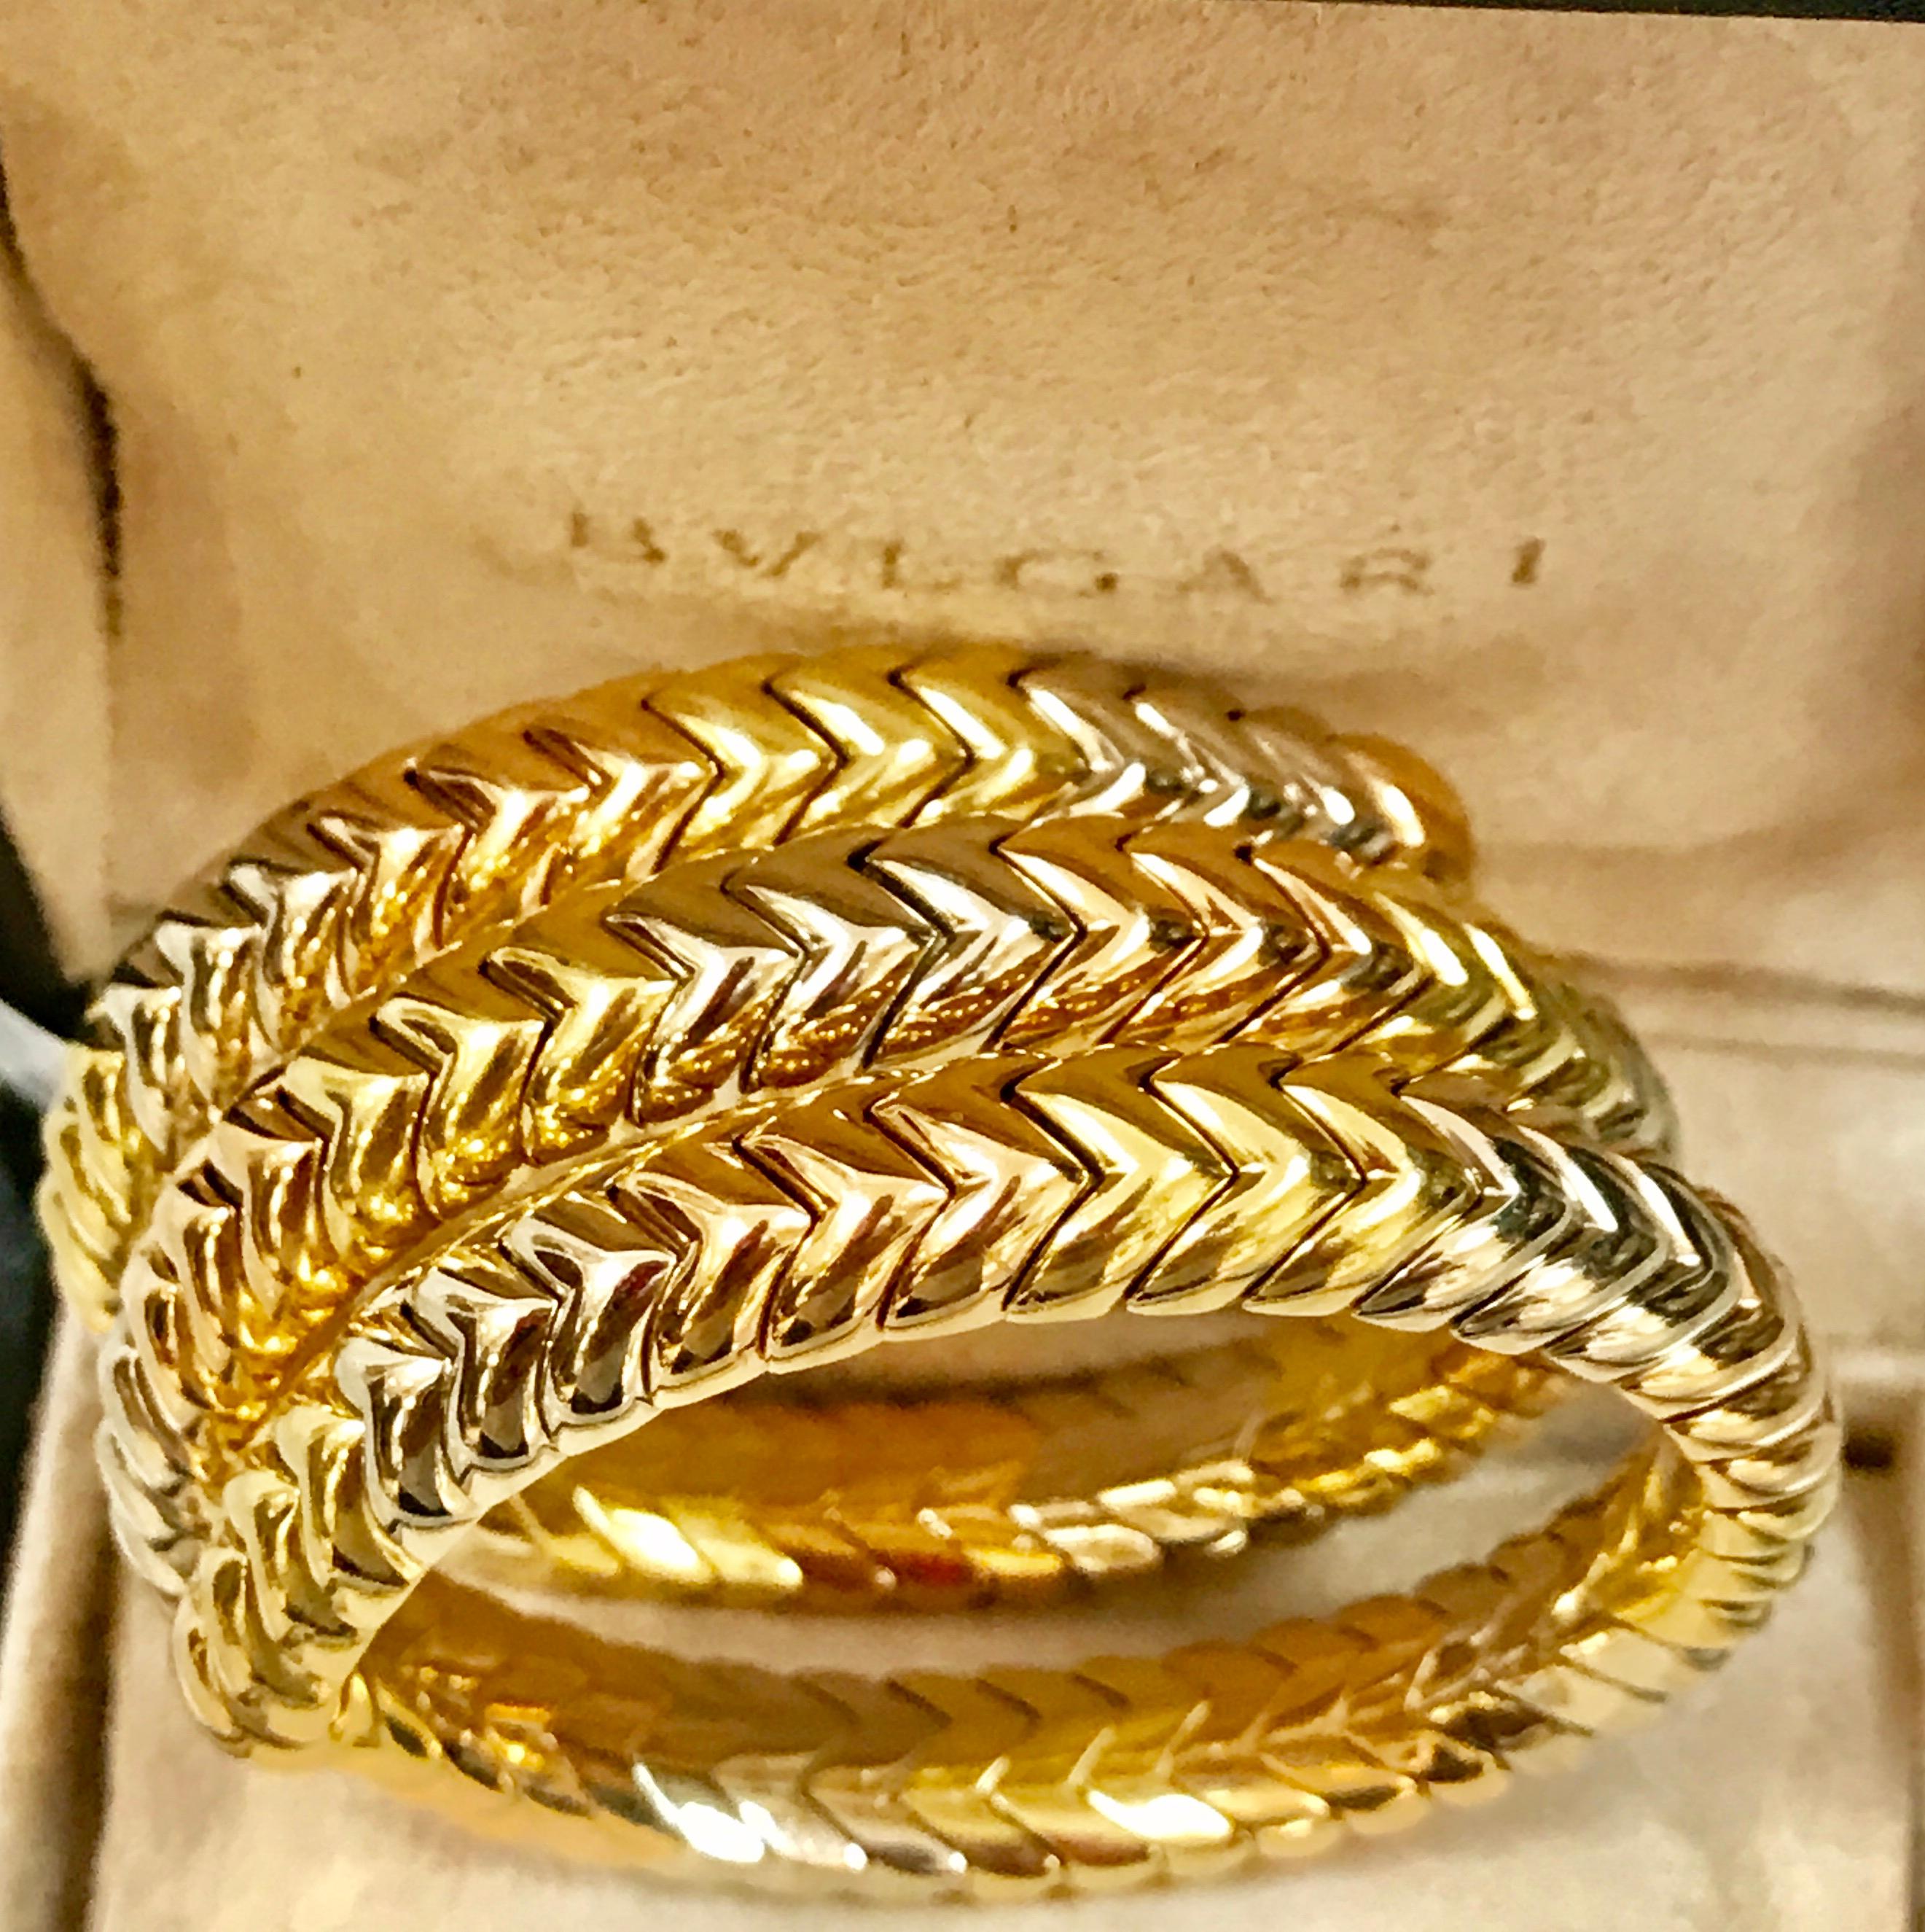 Bvlgari Serpenti 18 Karat Tri color Gold 92grams Bvlgari Snake Braclet Estate
This elegant Serpenti bracelet by Bvlgari takes an opulent serpentine shape. It’s designed in the form of a slithering serpent that curls around your wrist gracefully. It